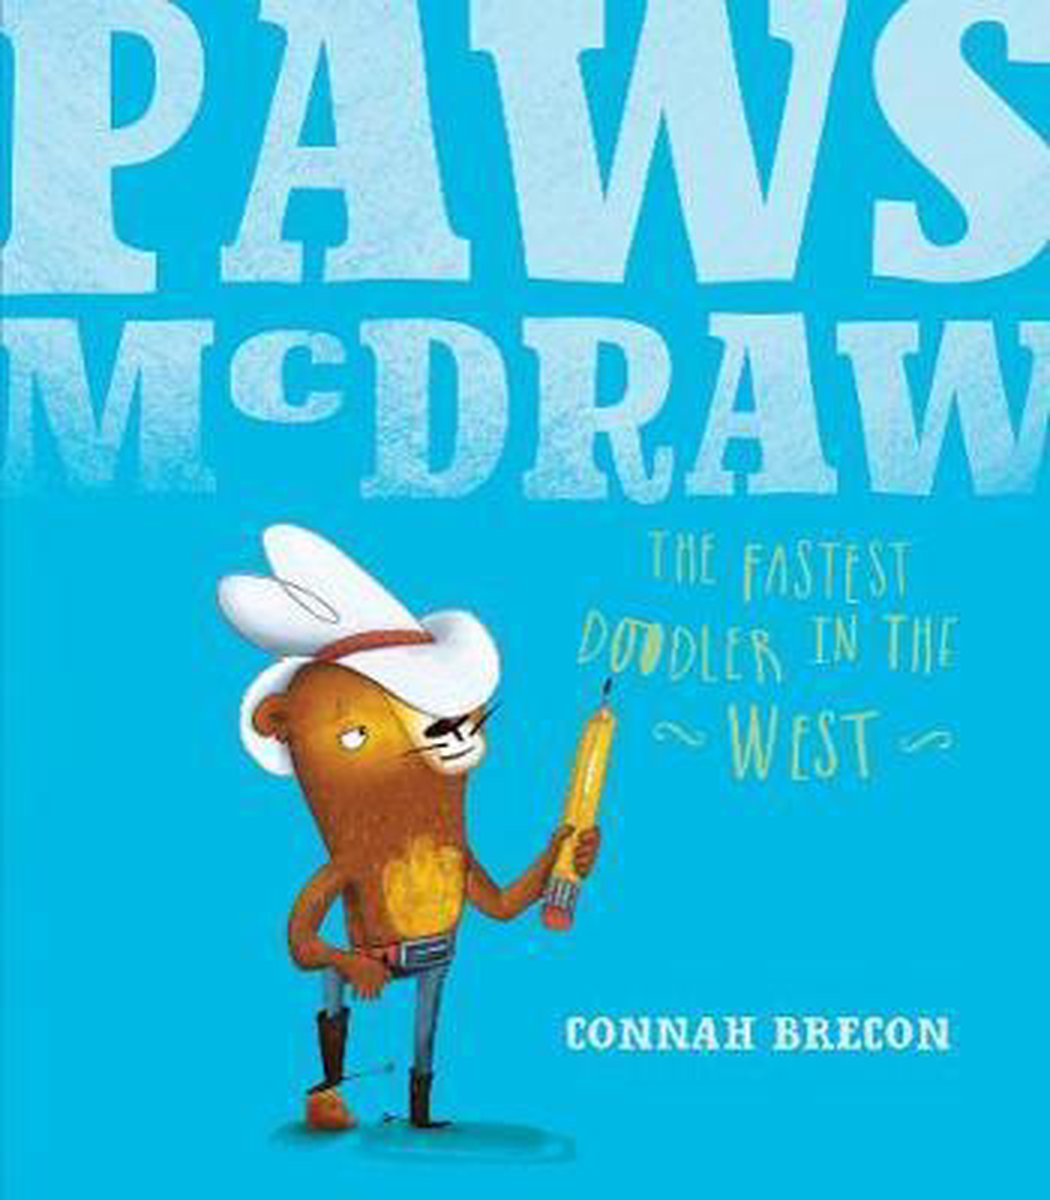 Paws McDraw Fastest Doodler In The West - Connah Brecon